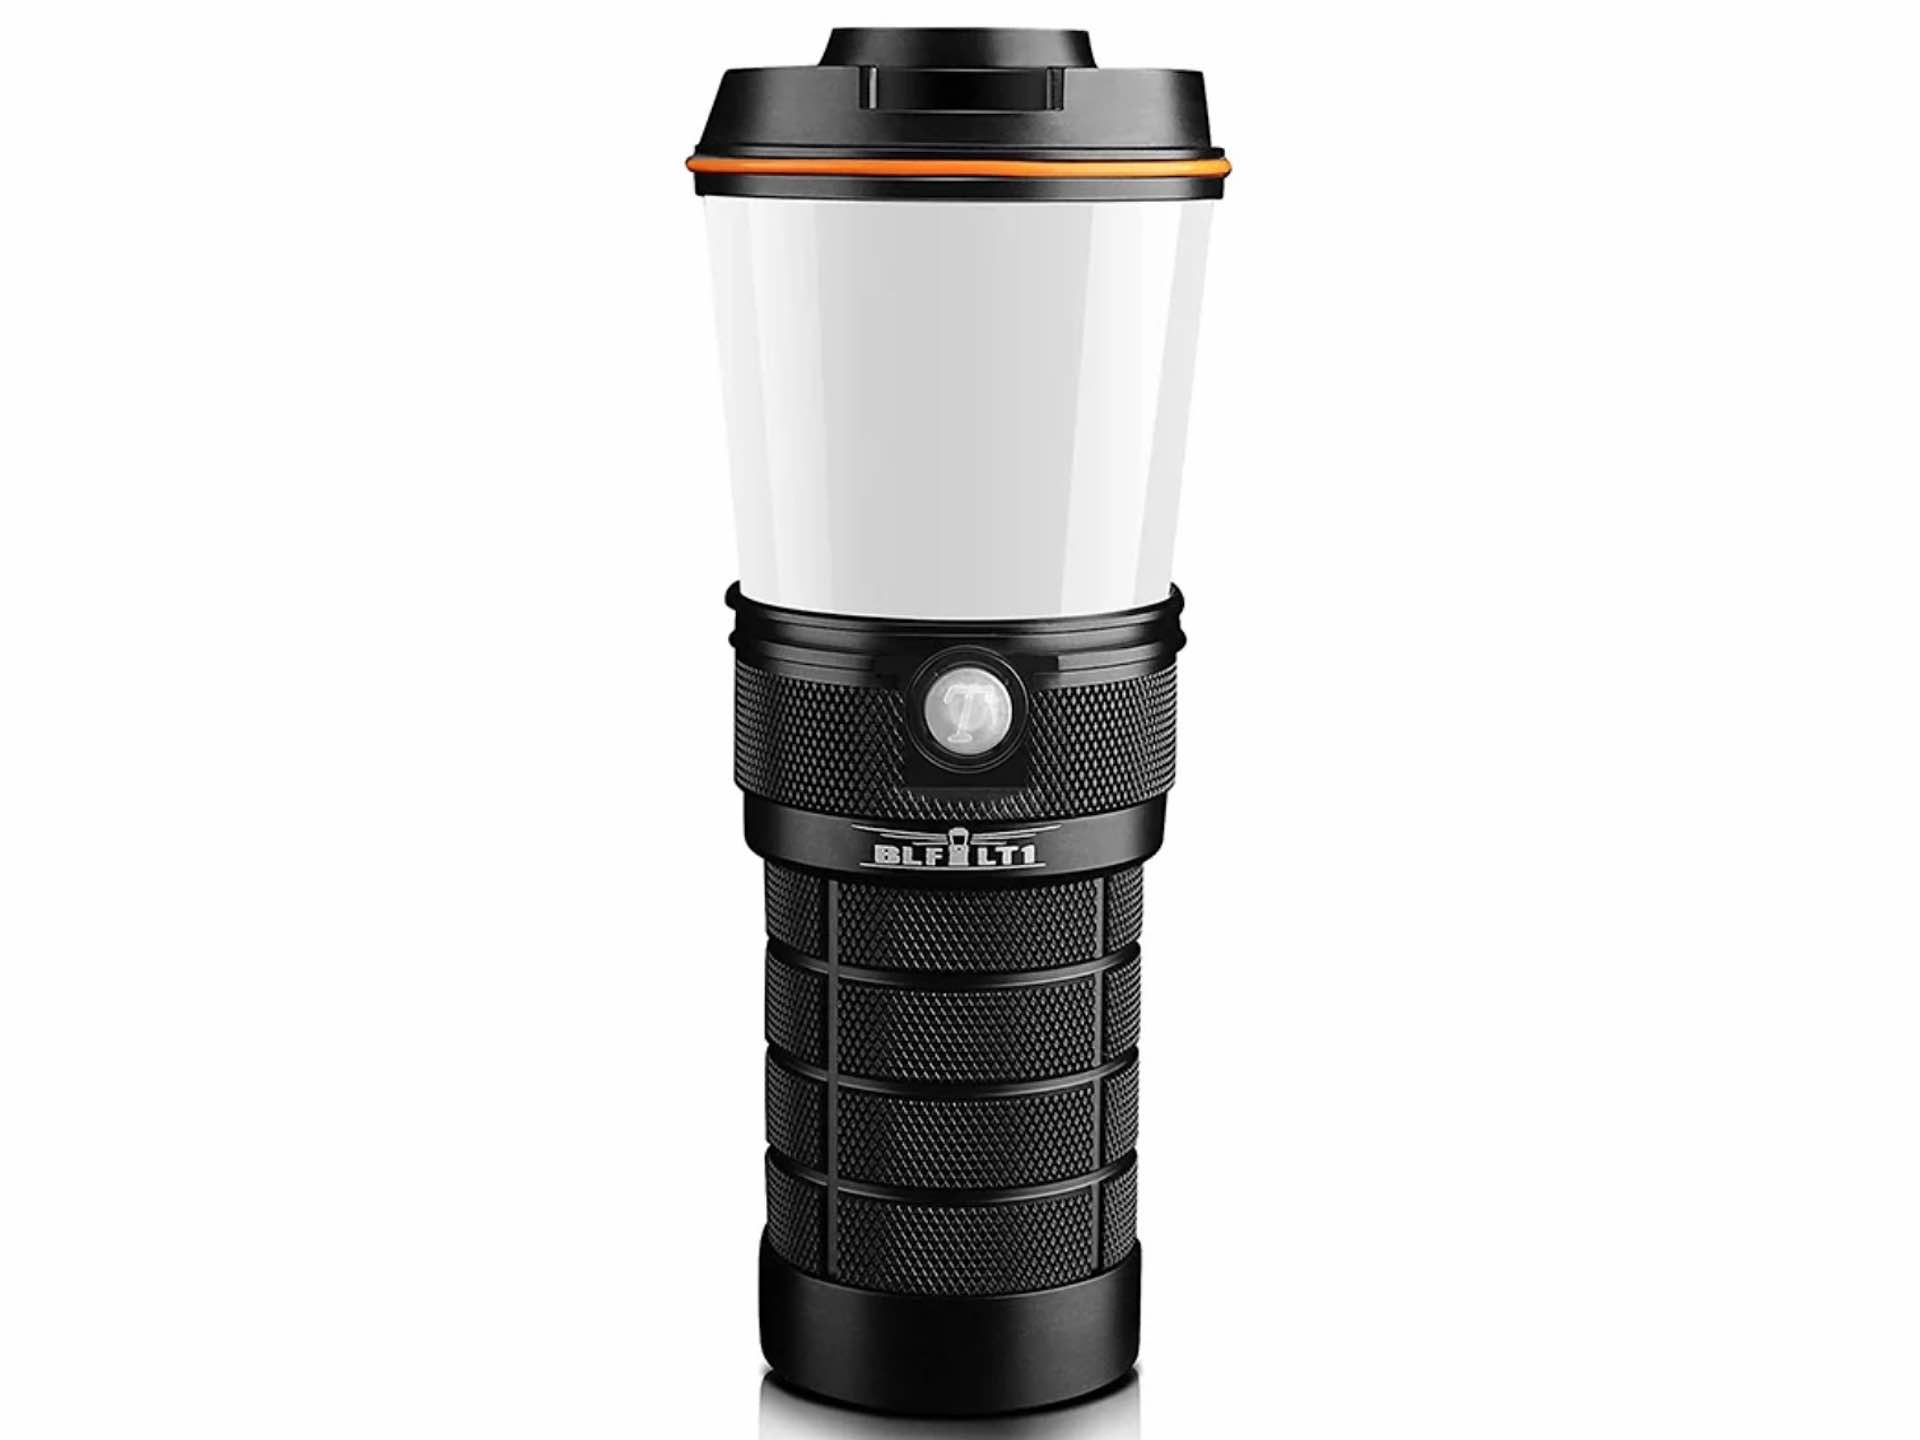 sofirn-lt1-rechargeable-led-camping-lantern